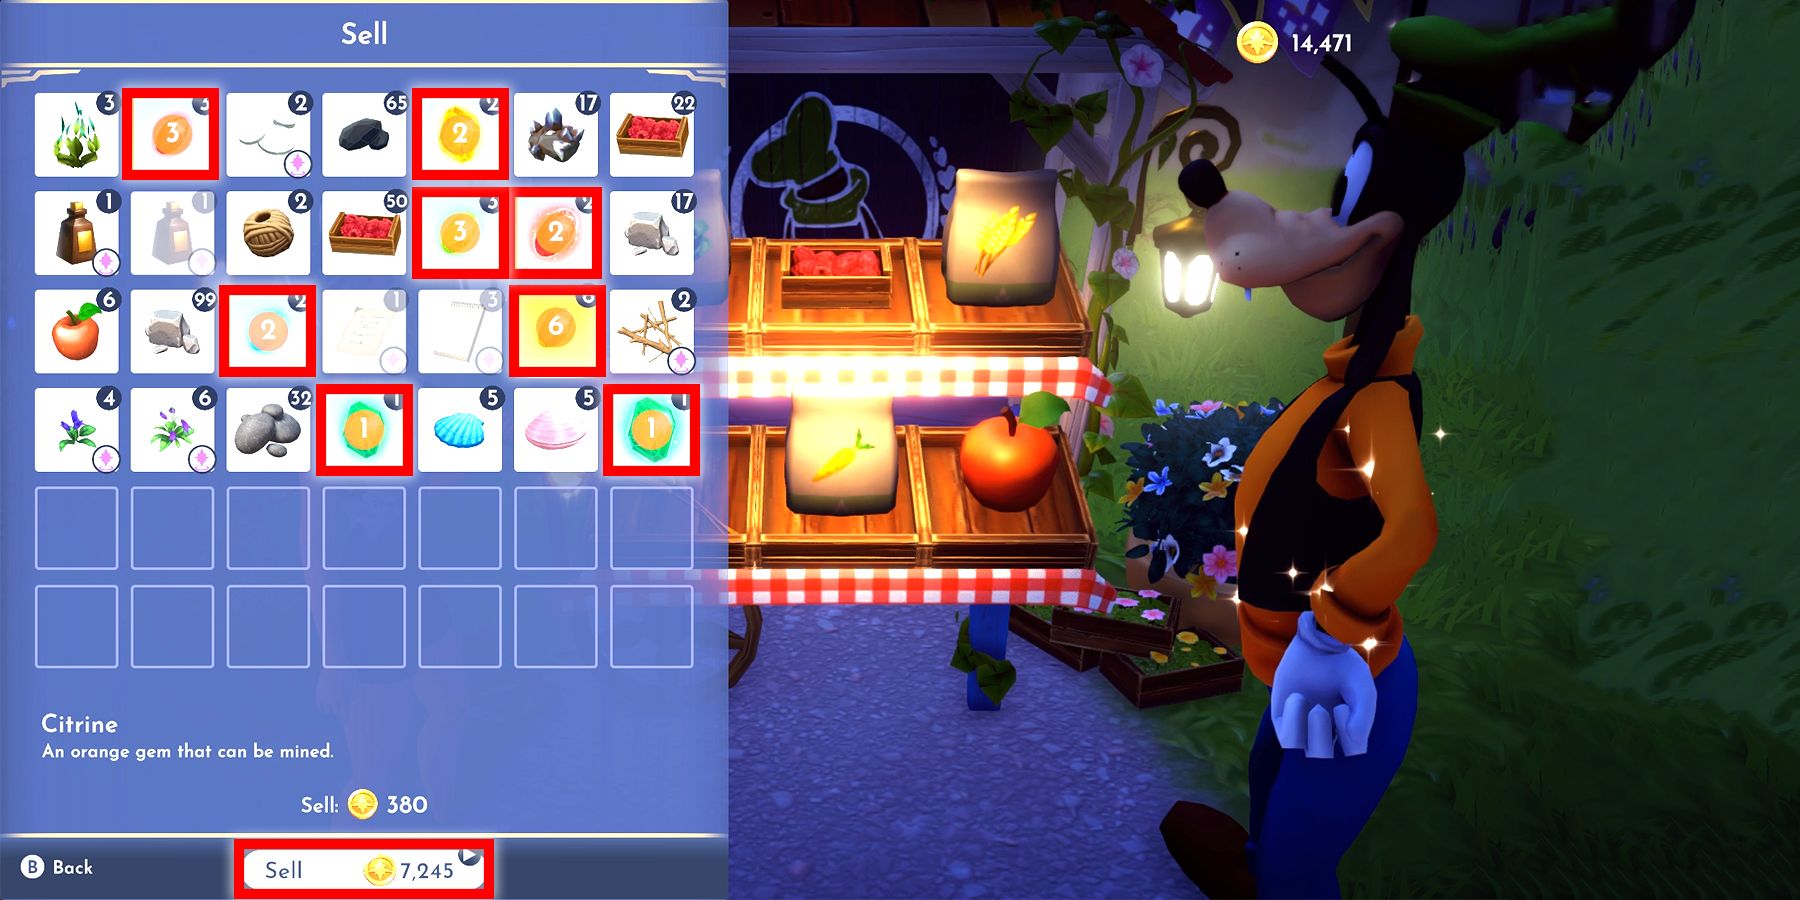 selling gems at goofy’s stall in disney dreamlight valley